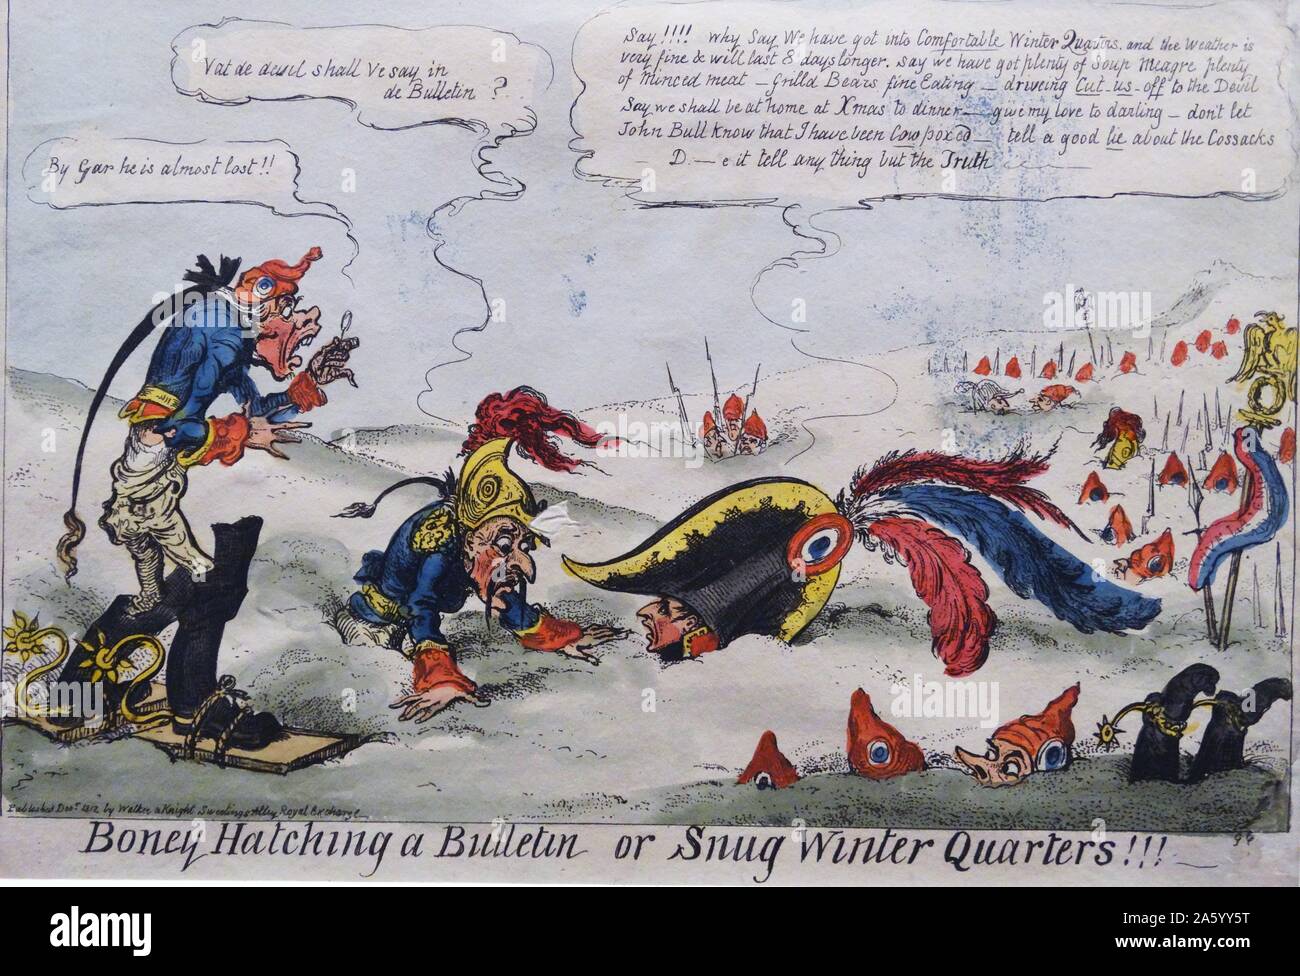 Hand-coloured etching titled 'Boney Hatching a Bulletin or Snug Winter Quarters' by George Cruikshank (1792-1878) British caricaturist and book illustrator. Dated 1812 Stock Photo